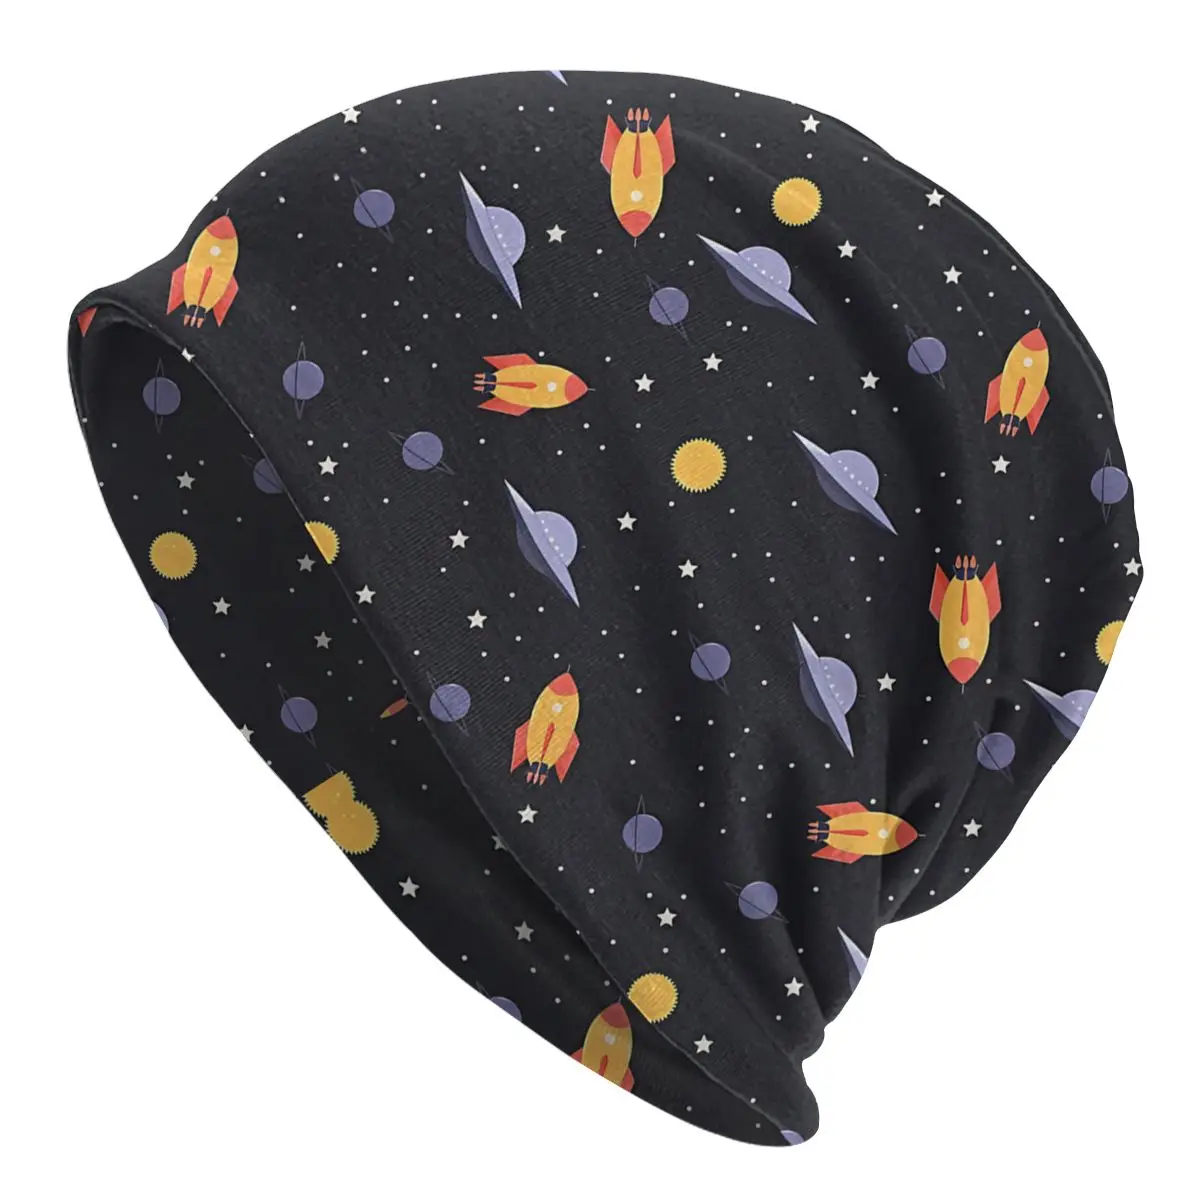 

Rockets Thin Bonnet Homme Outdoor Alien And UFO Skullies Beanies Caps Style Hats